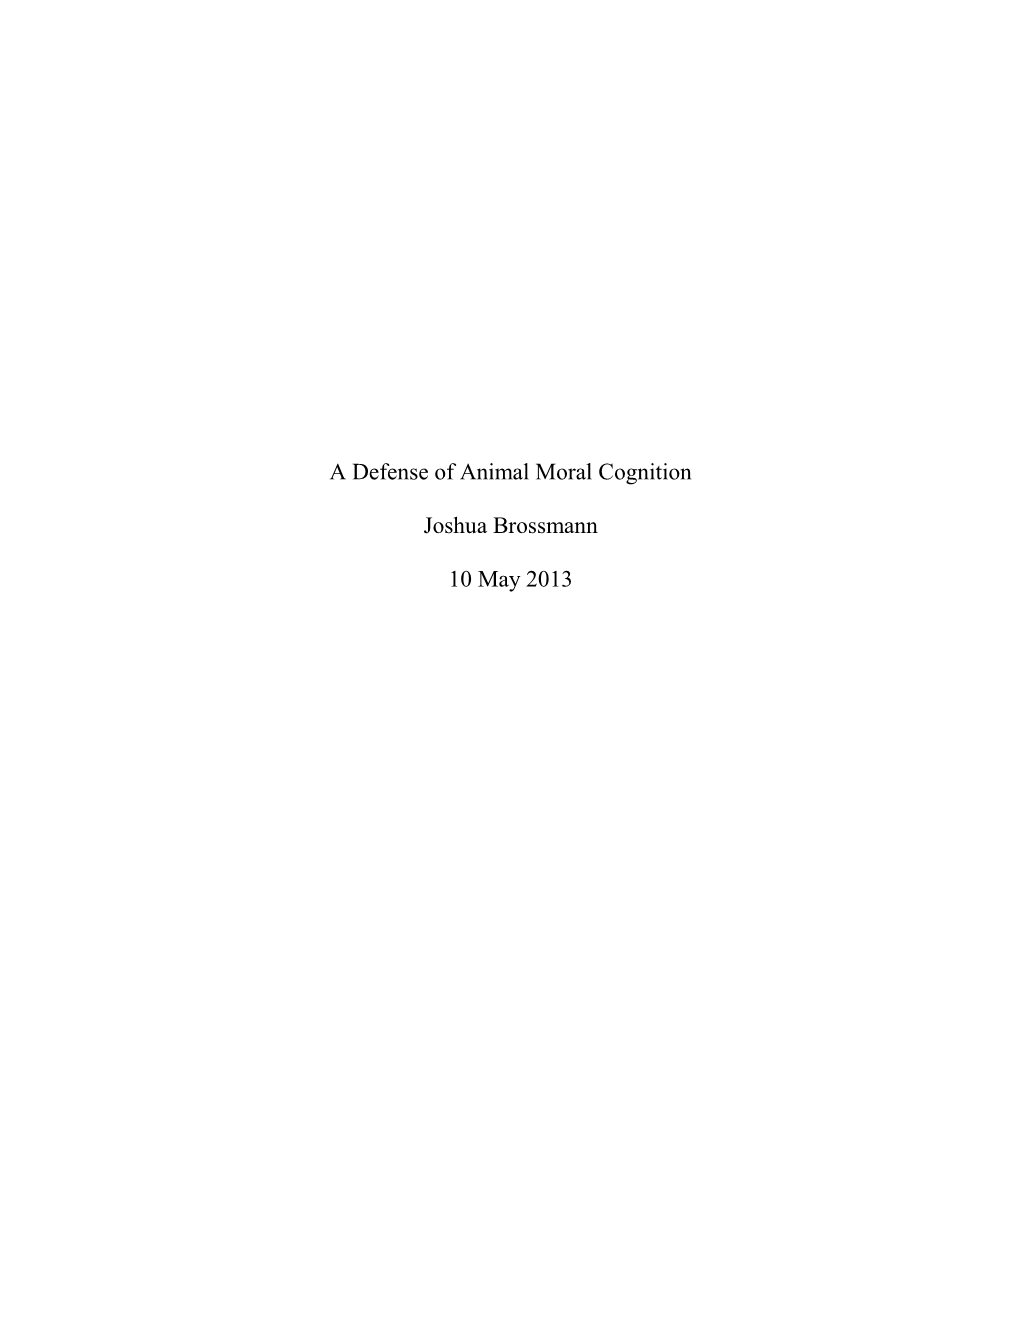 A Defense of Animal Moral Cognition Joshua Brossmann 10 May 2013